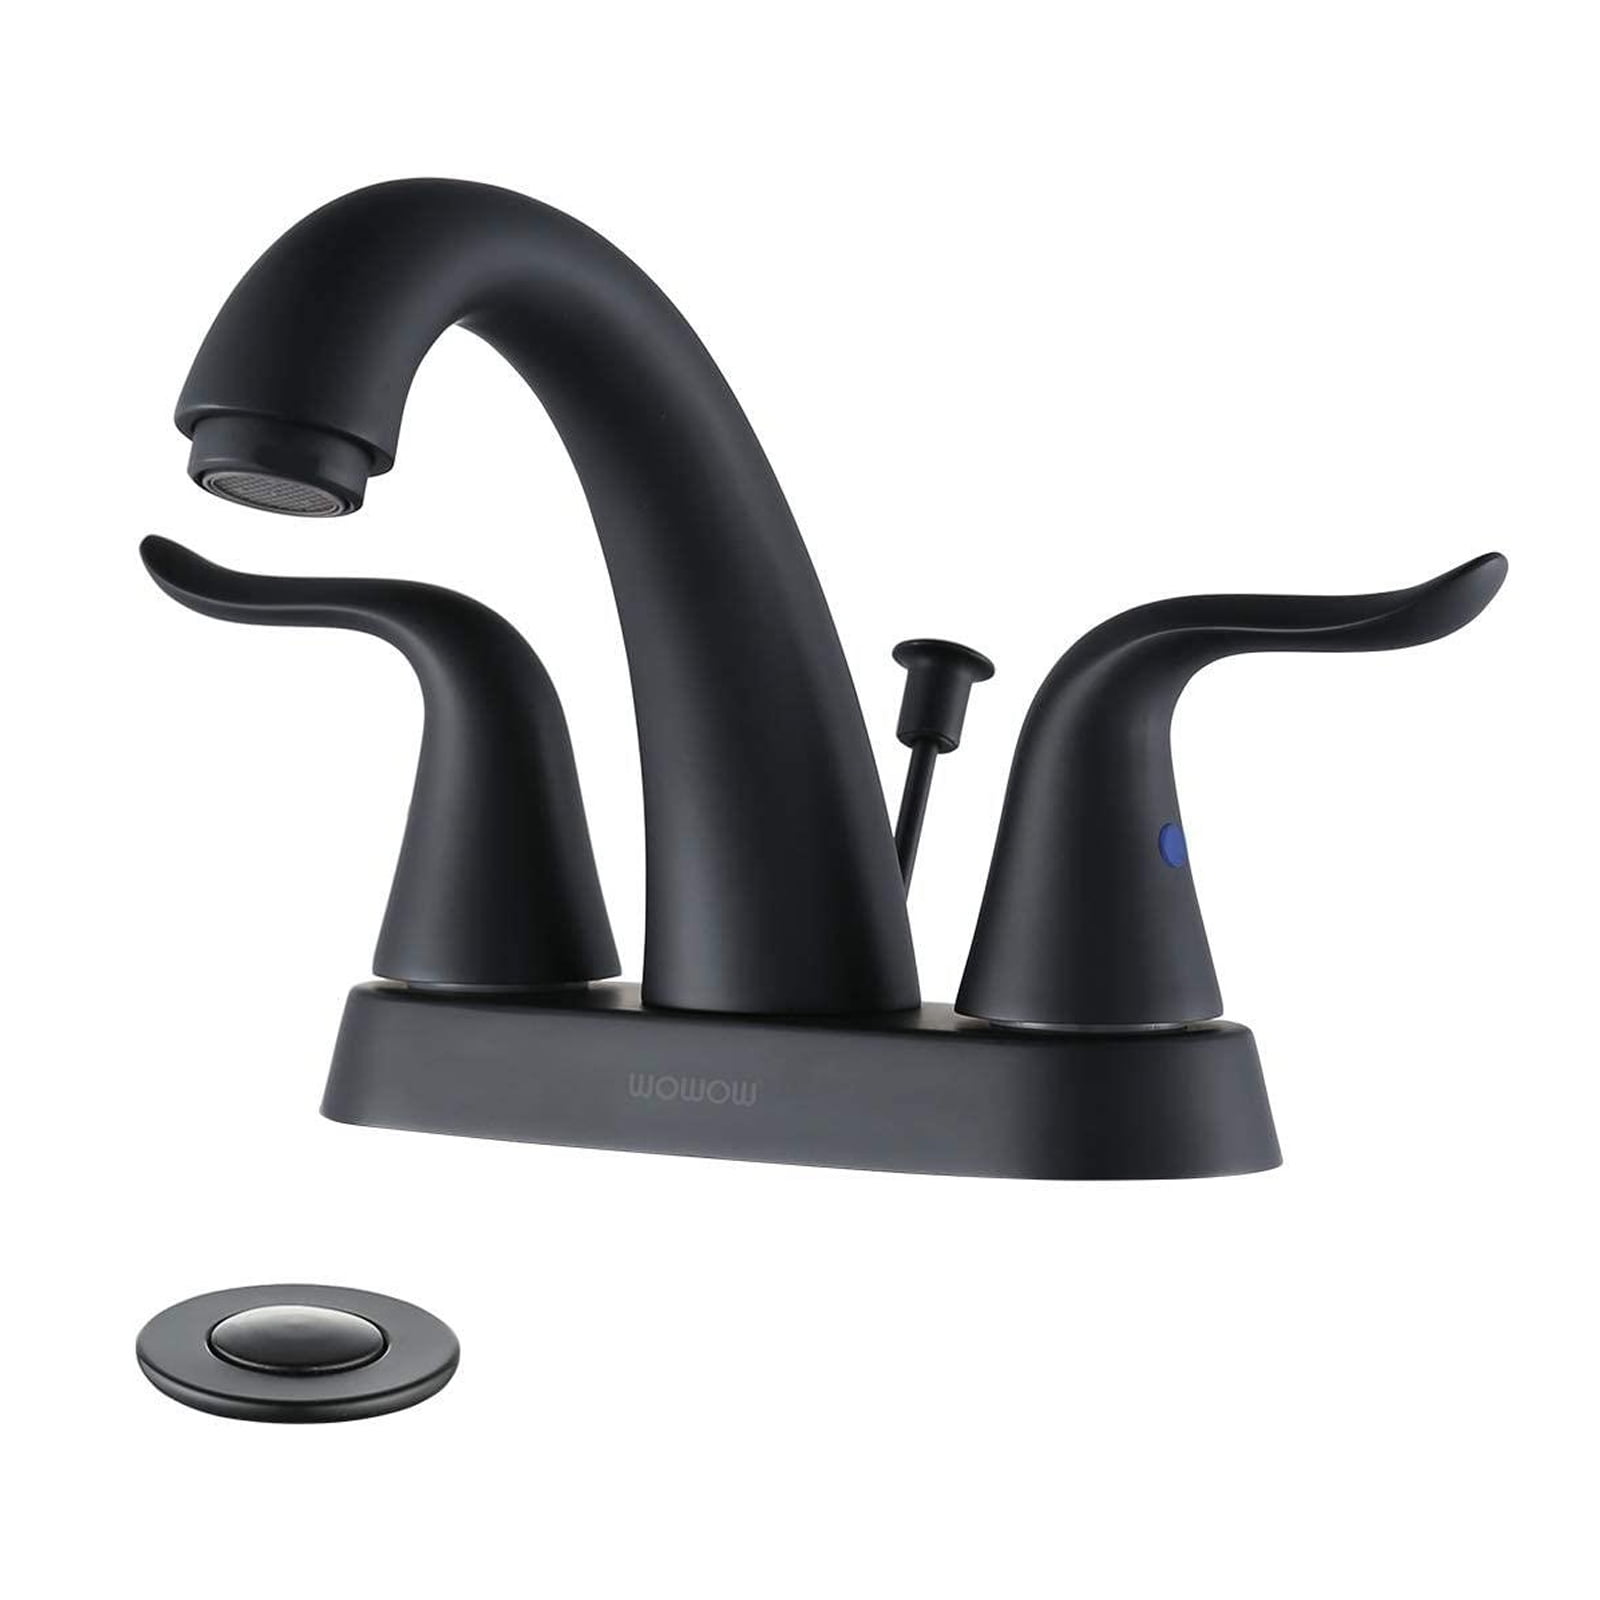 WOWOW Oil Rubbed Bronze bathroom faucet for bathroom sink faucet hole  Lavatory Faucet Handle Vanity Faucet with Drain and Supply Hose Mixer Tap  キッチン